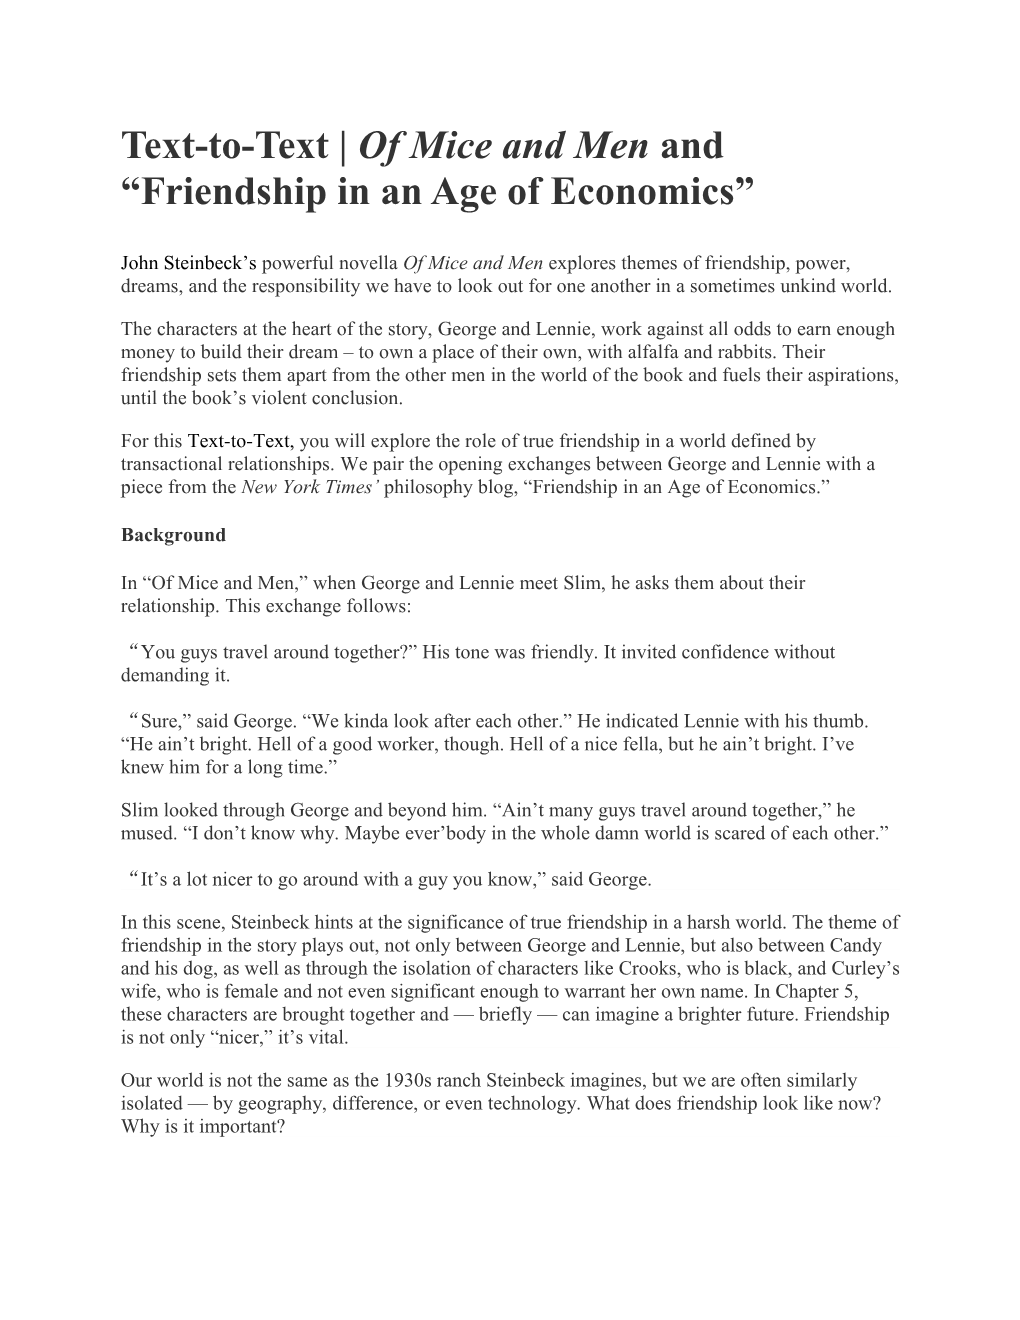 Text-To-Text of Mice and Men and Friendship in an Age of Economics